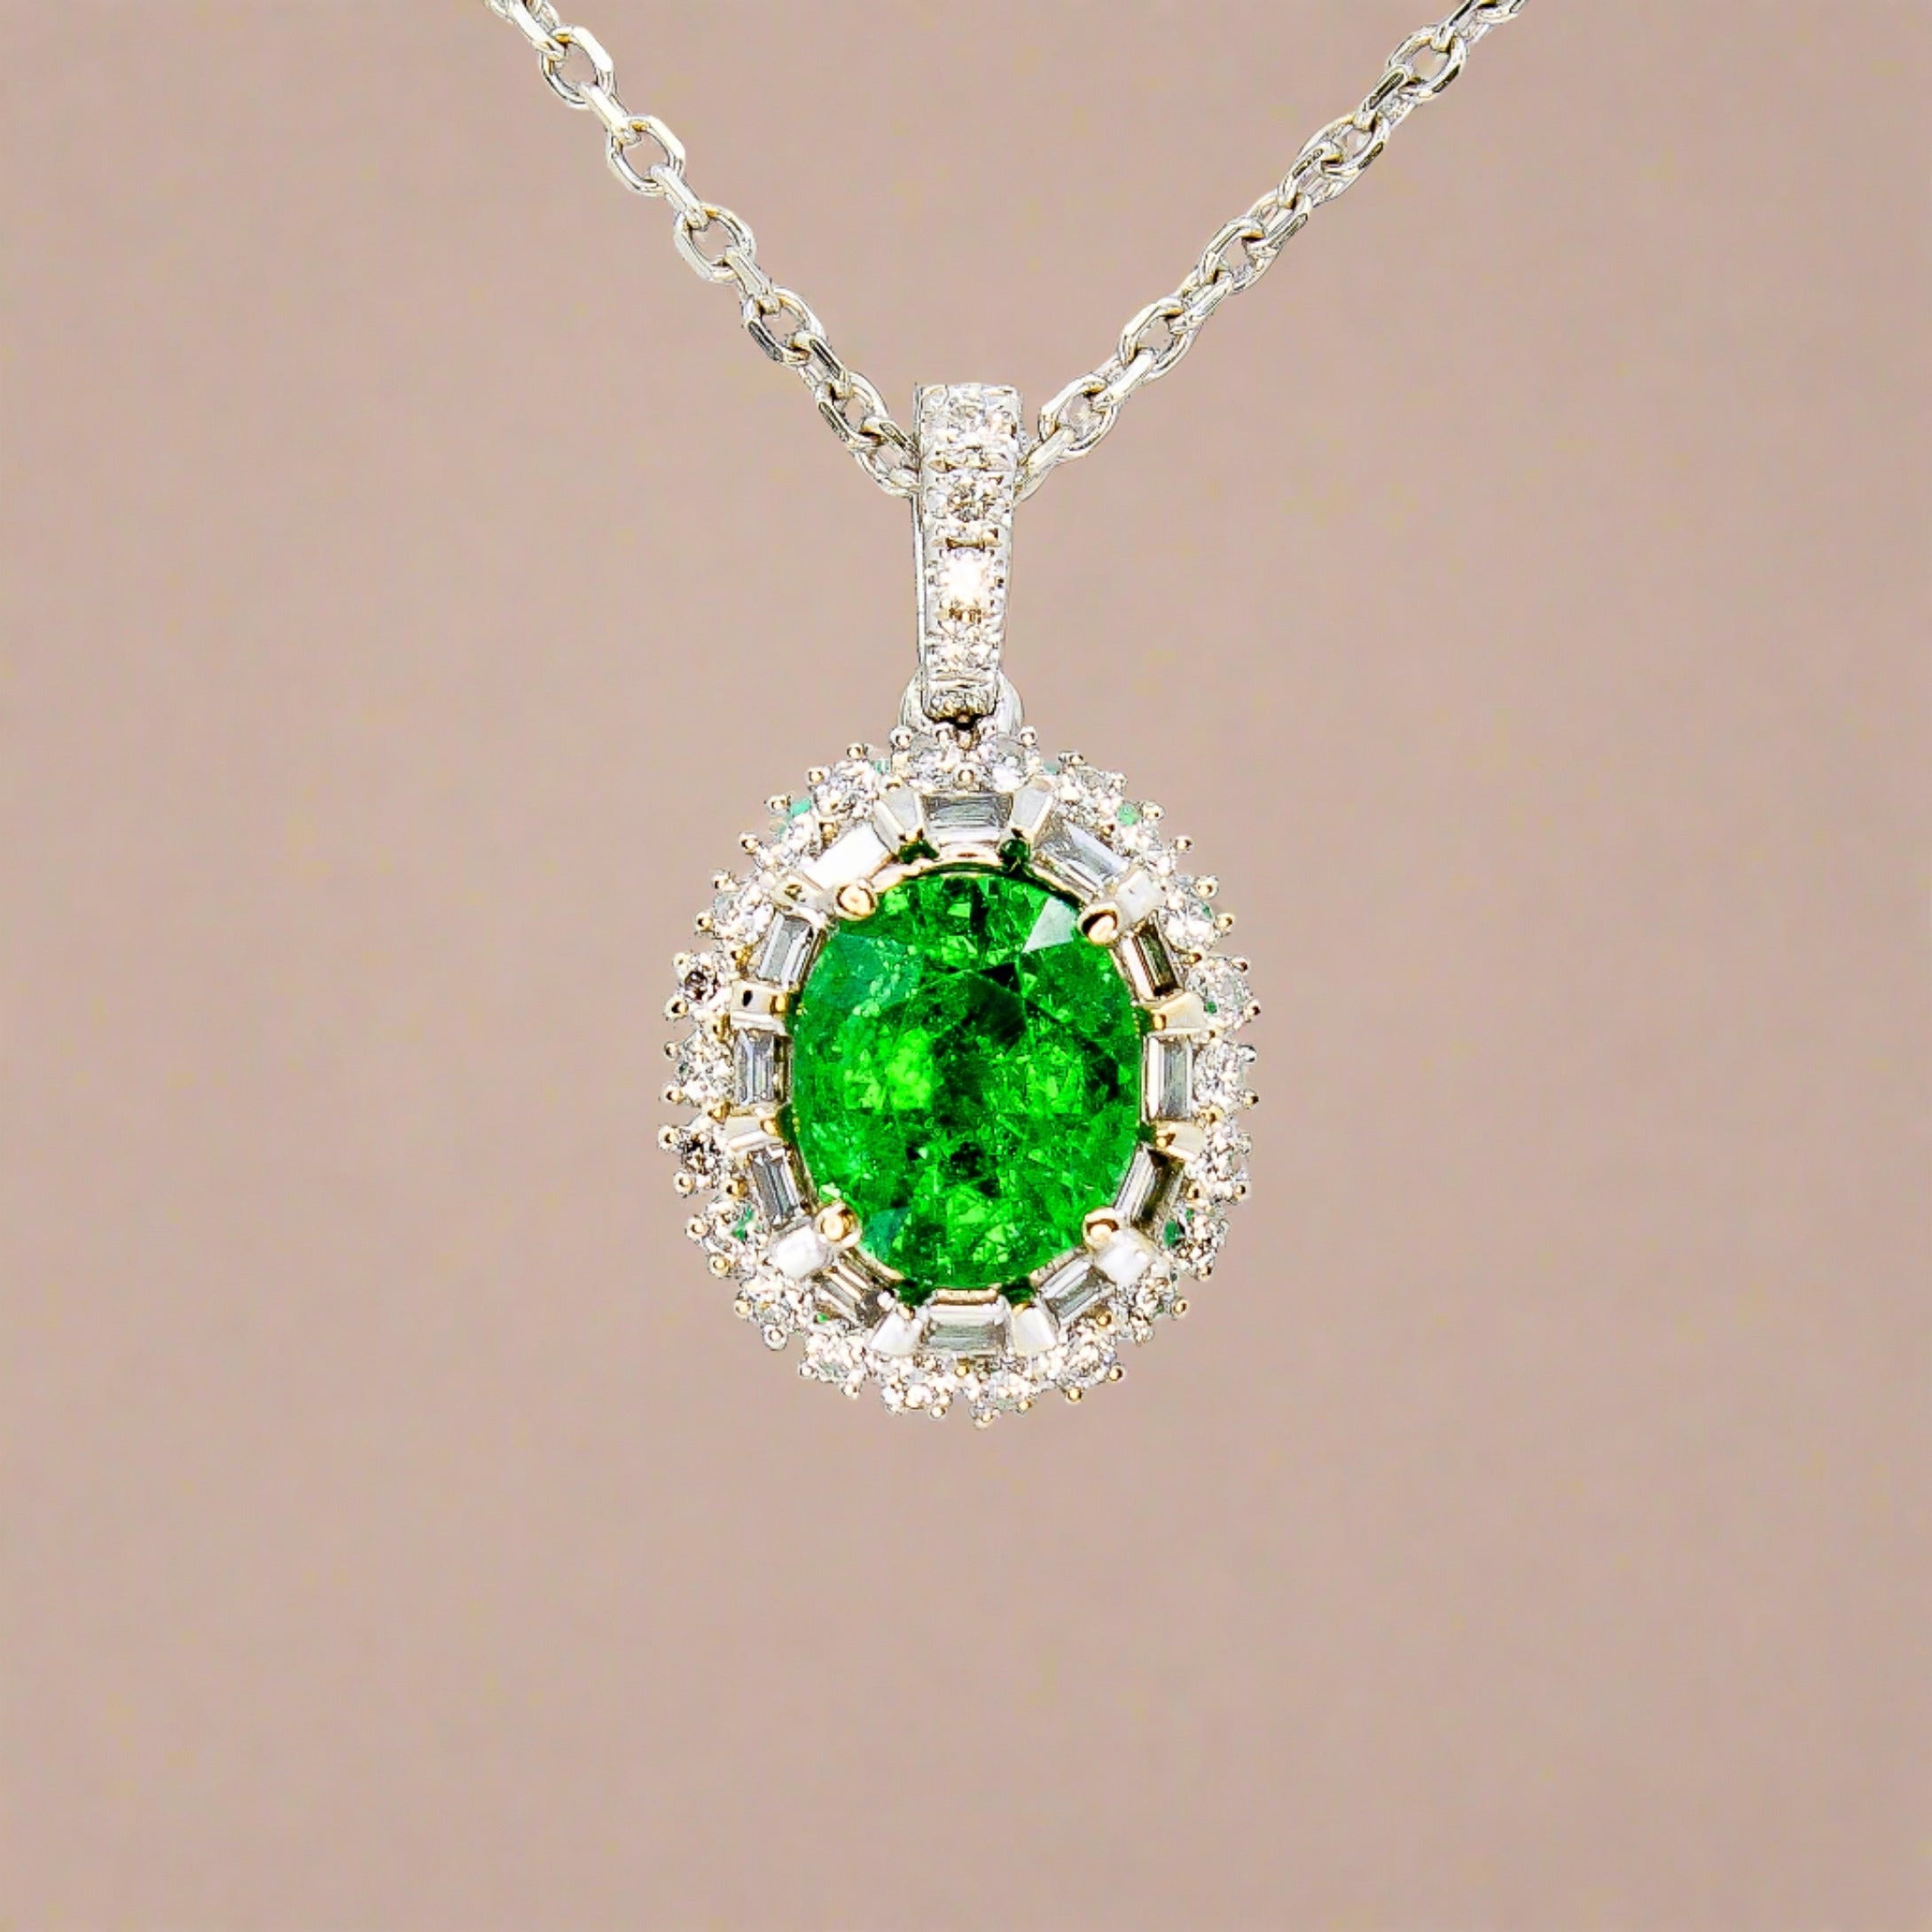 Tsavorite garnet pedant in 18k white gold with a diamond accent and double halo